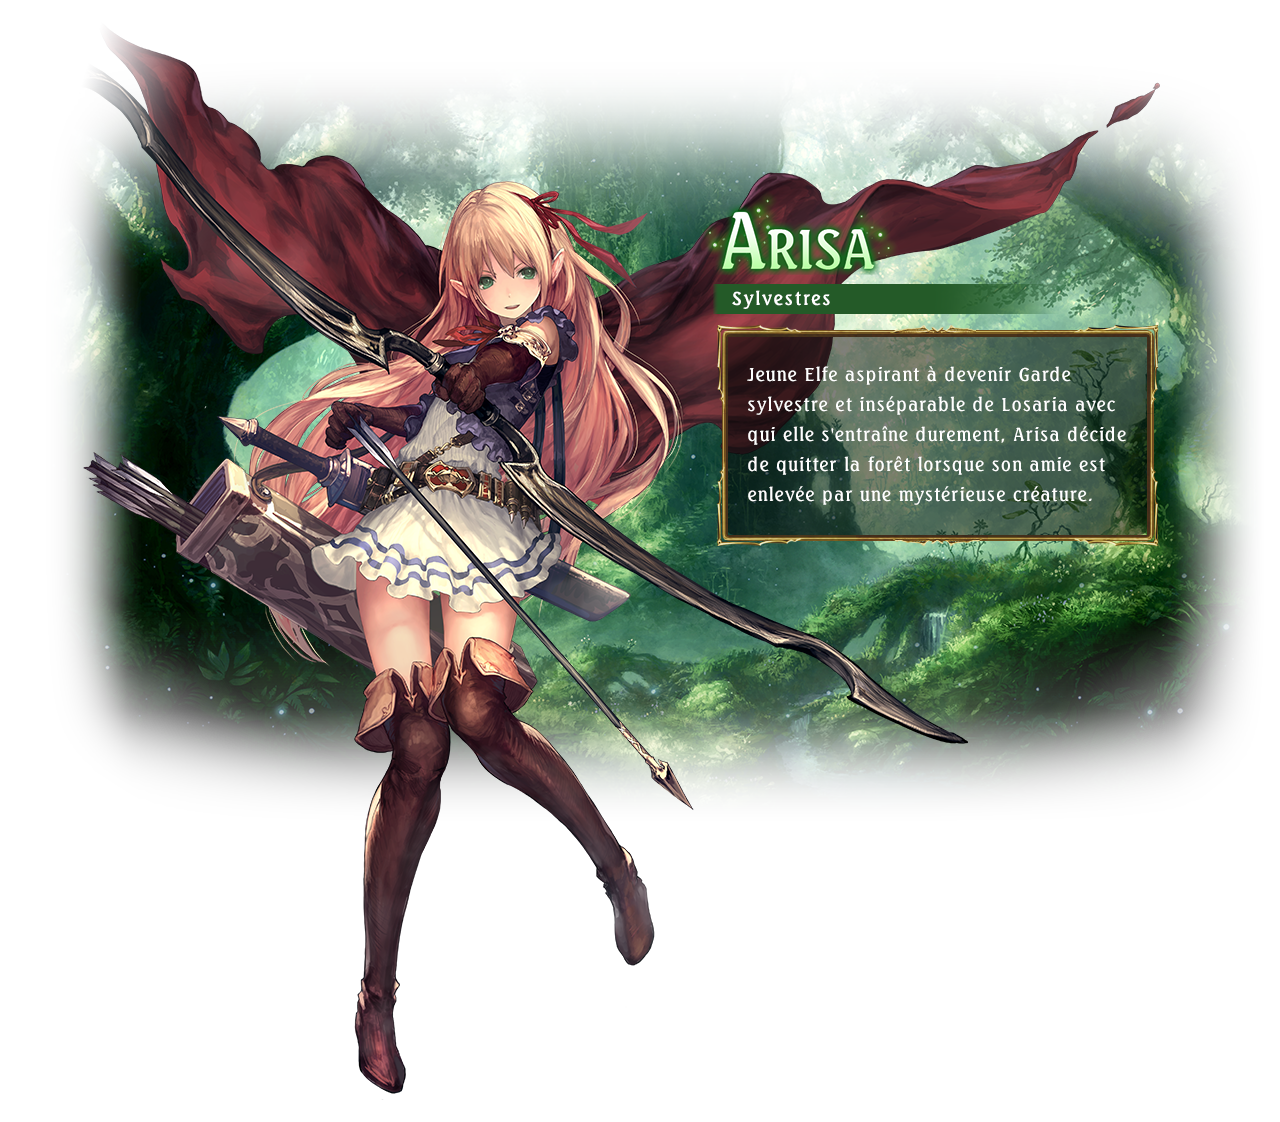 Arisa / Class: Forestcraft / Arisa is training as a guardian of the forest. She is inseparable from her friend Losaria until one day a menacing creature appears in their path.